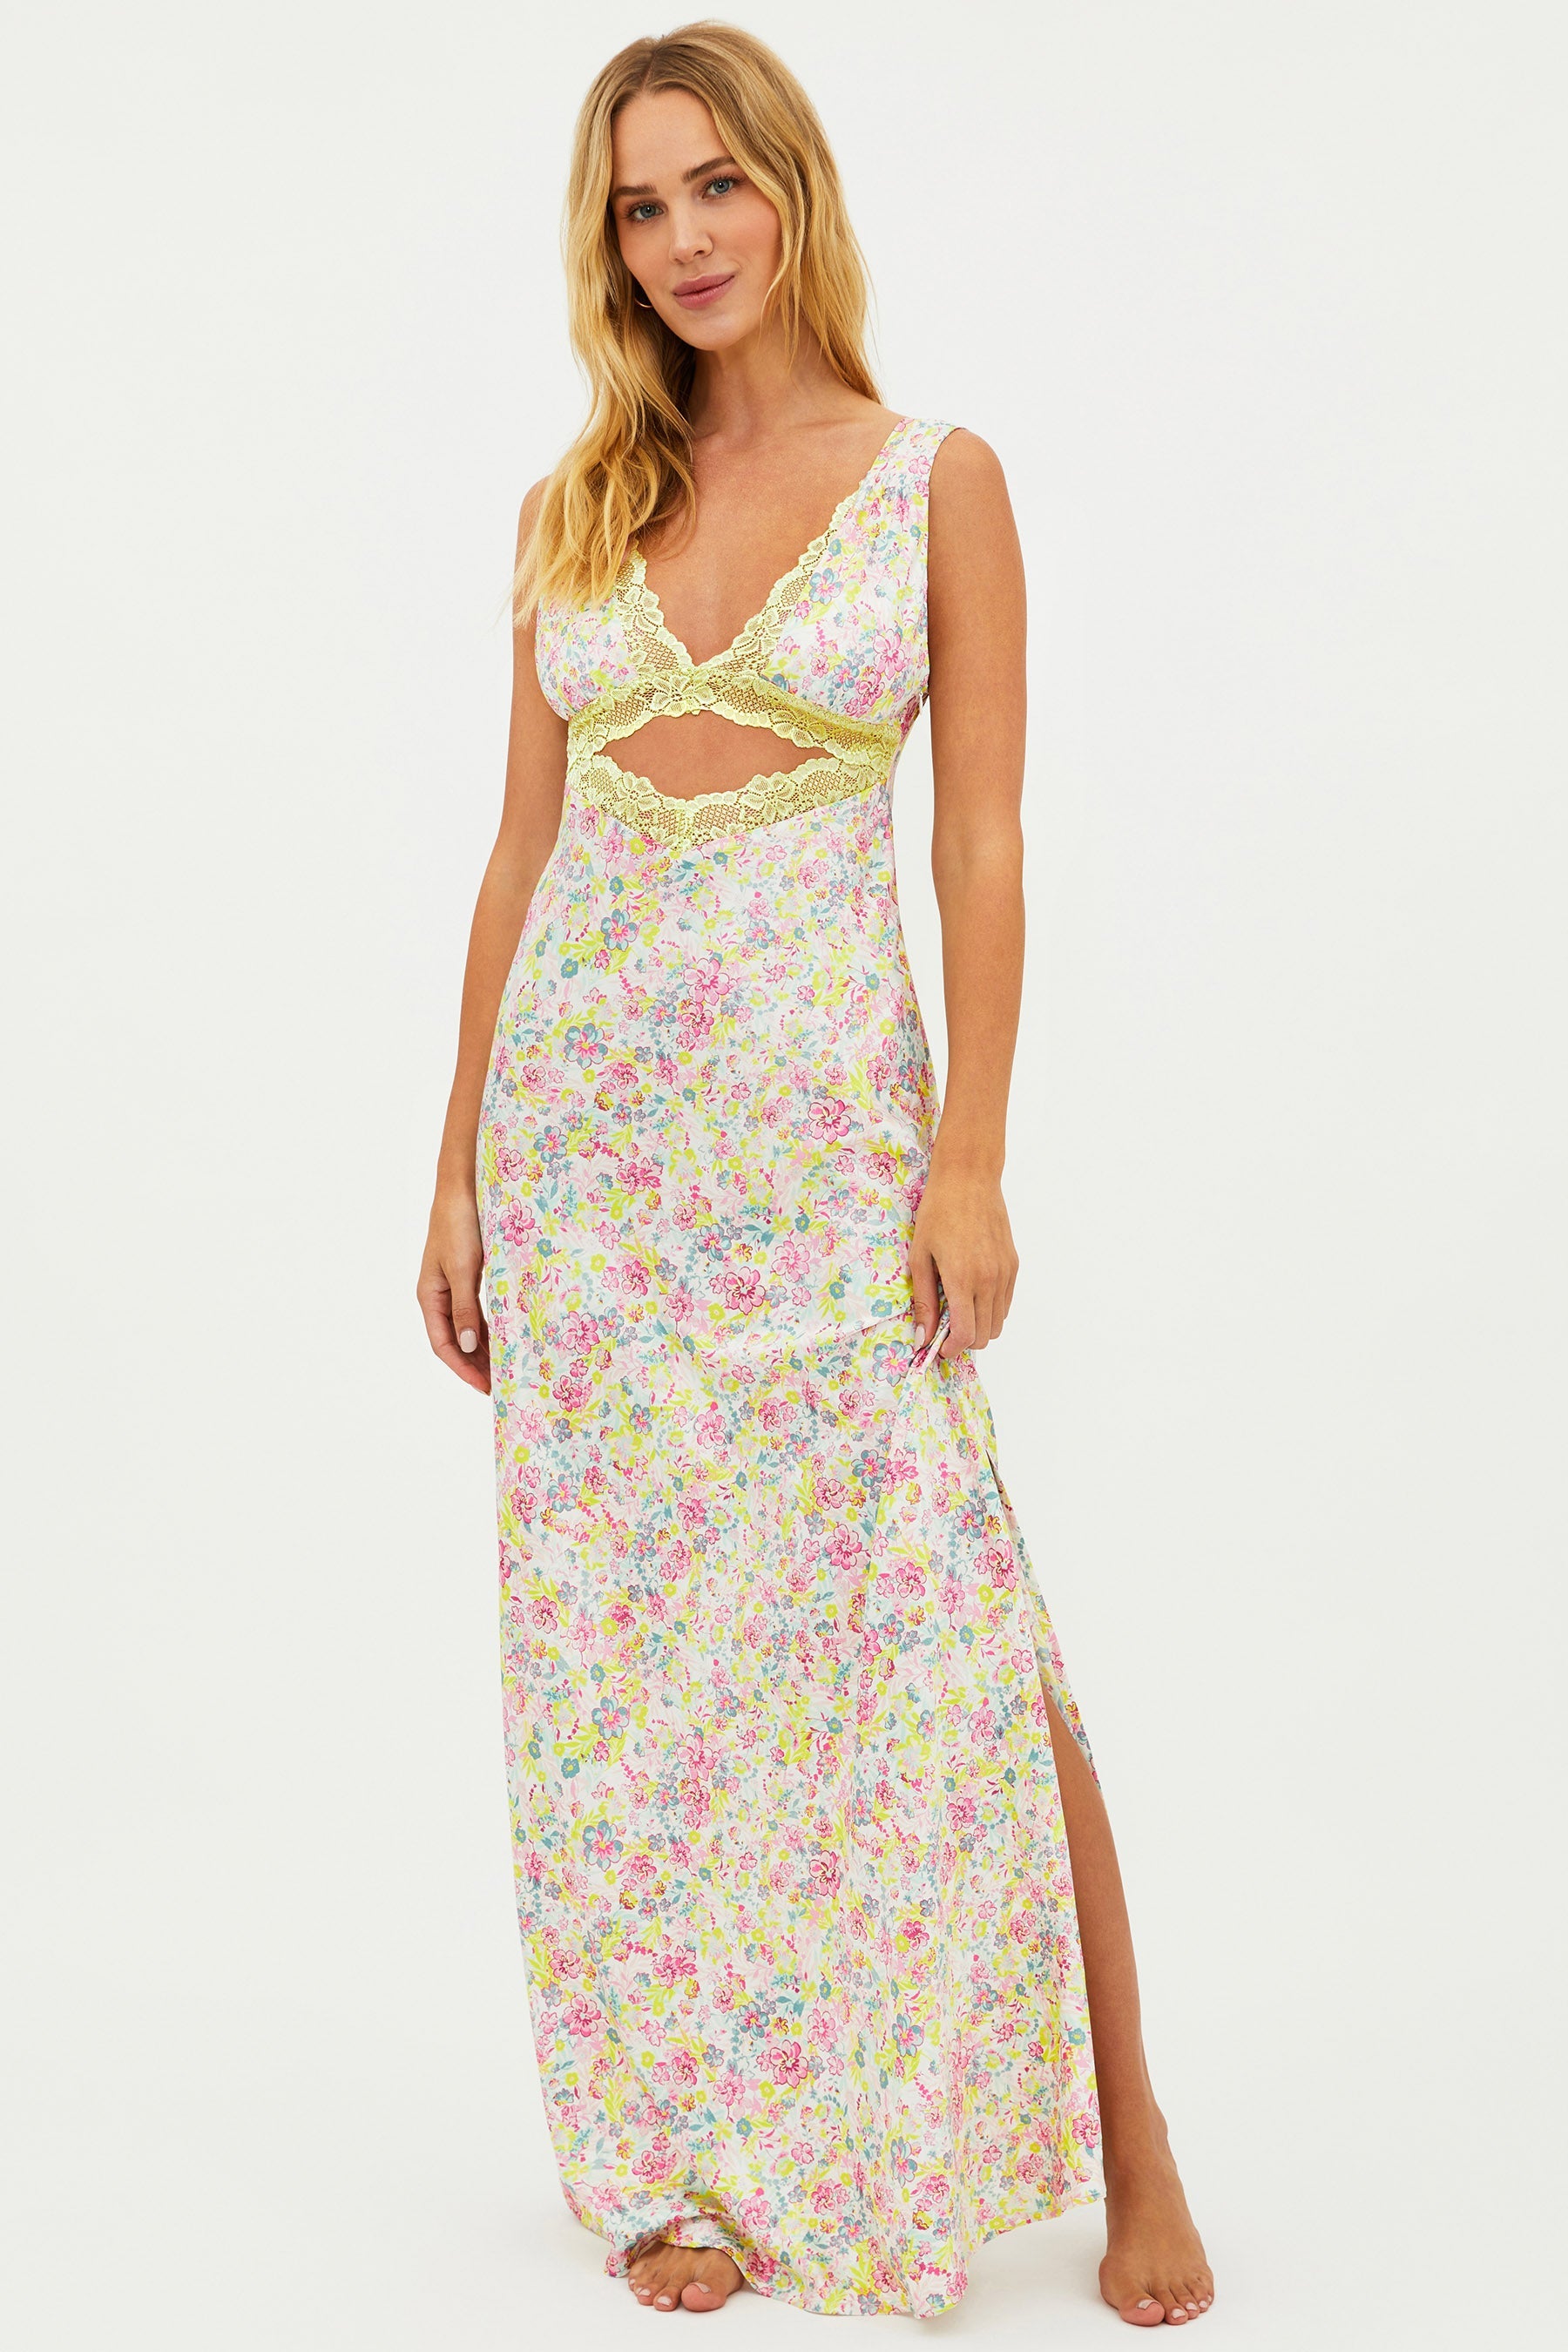 Kimi Dress Forget Me Not Floral